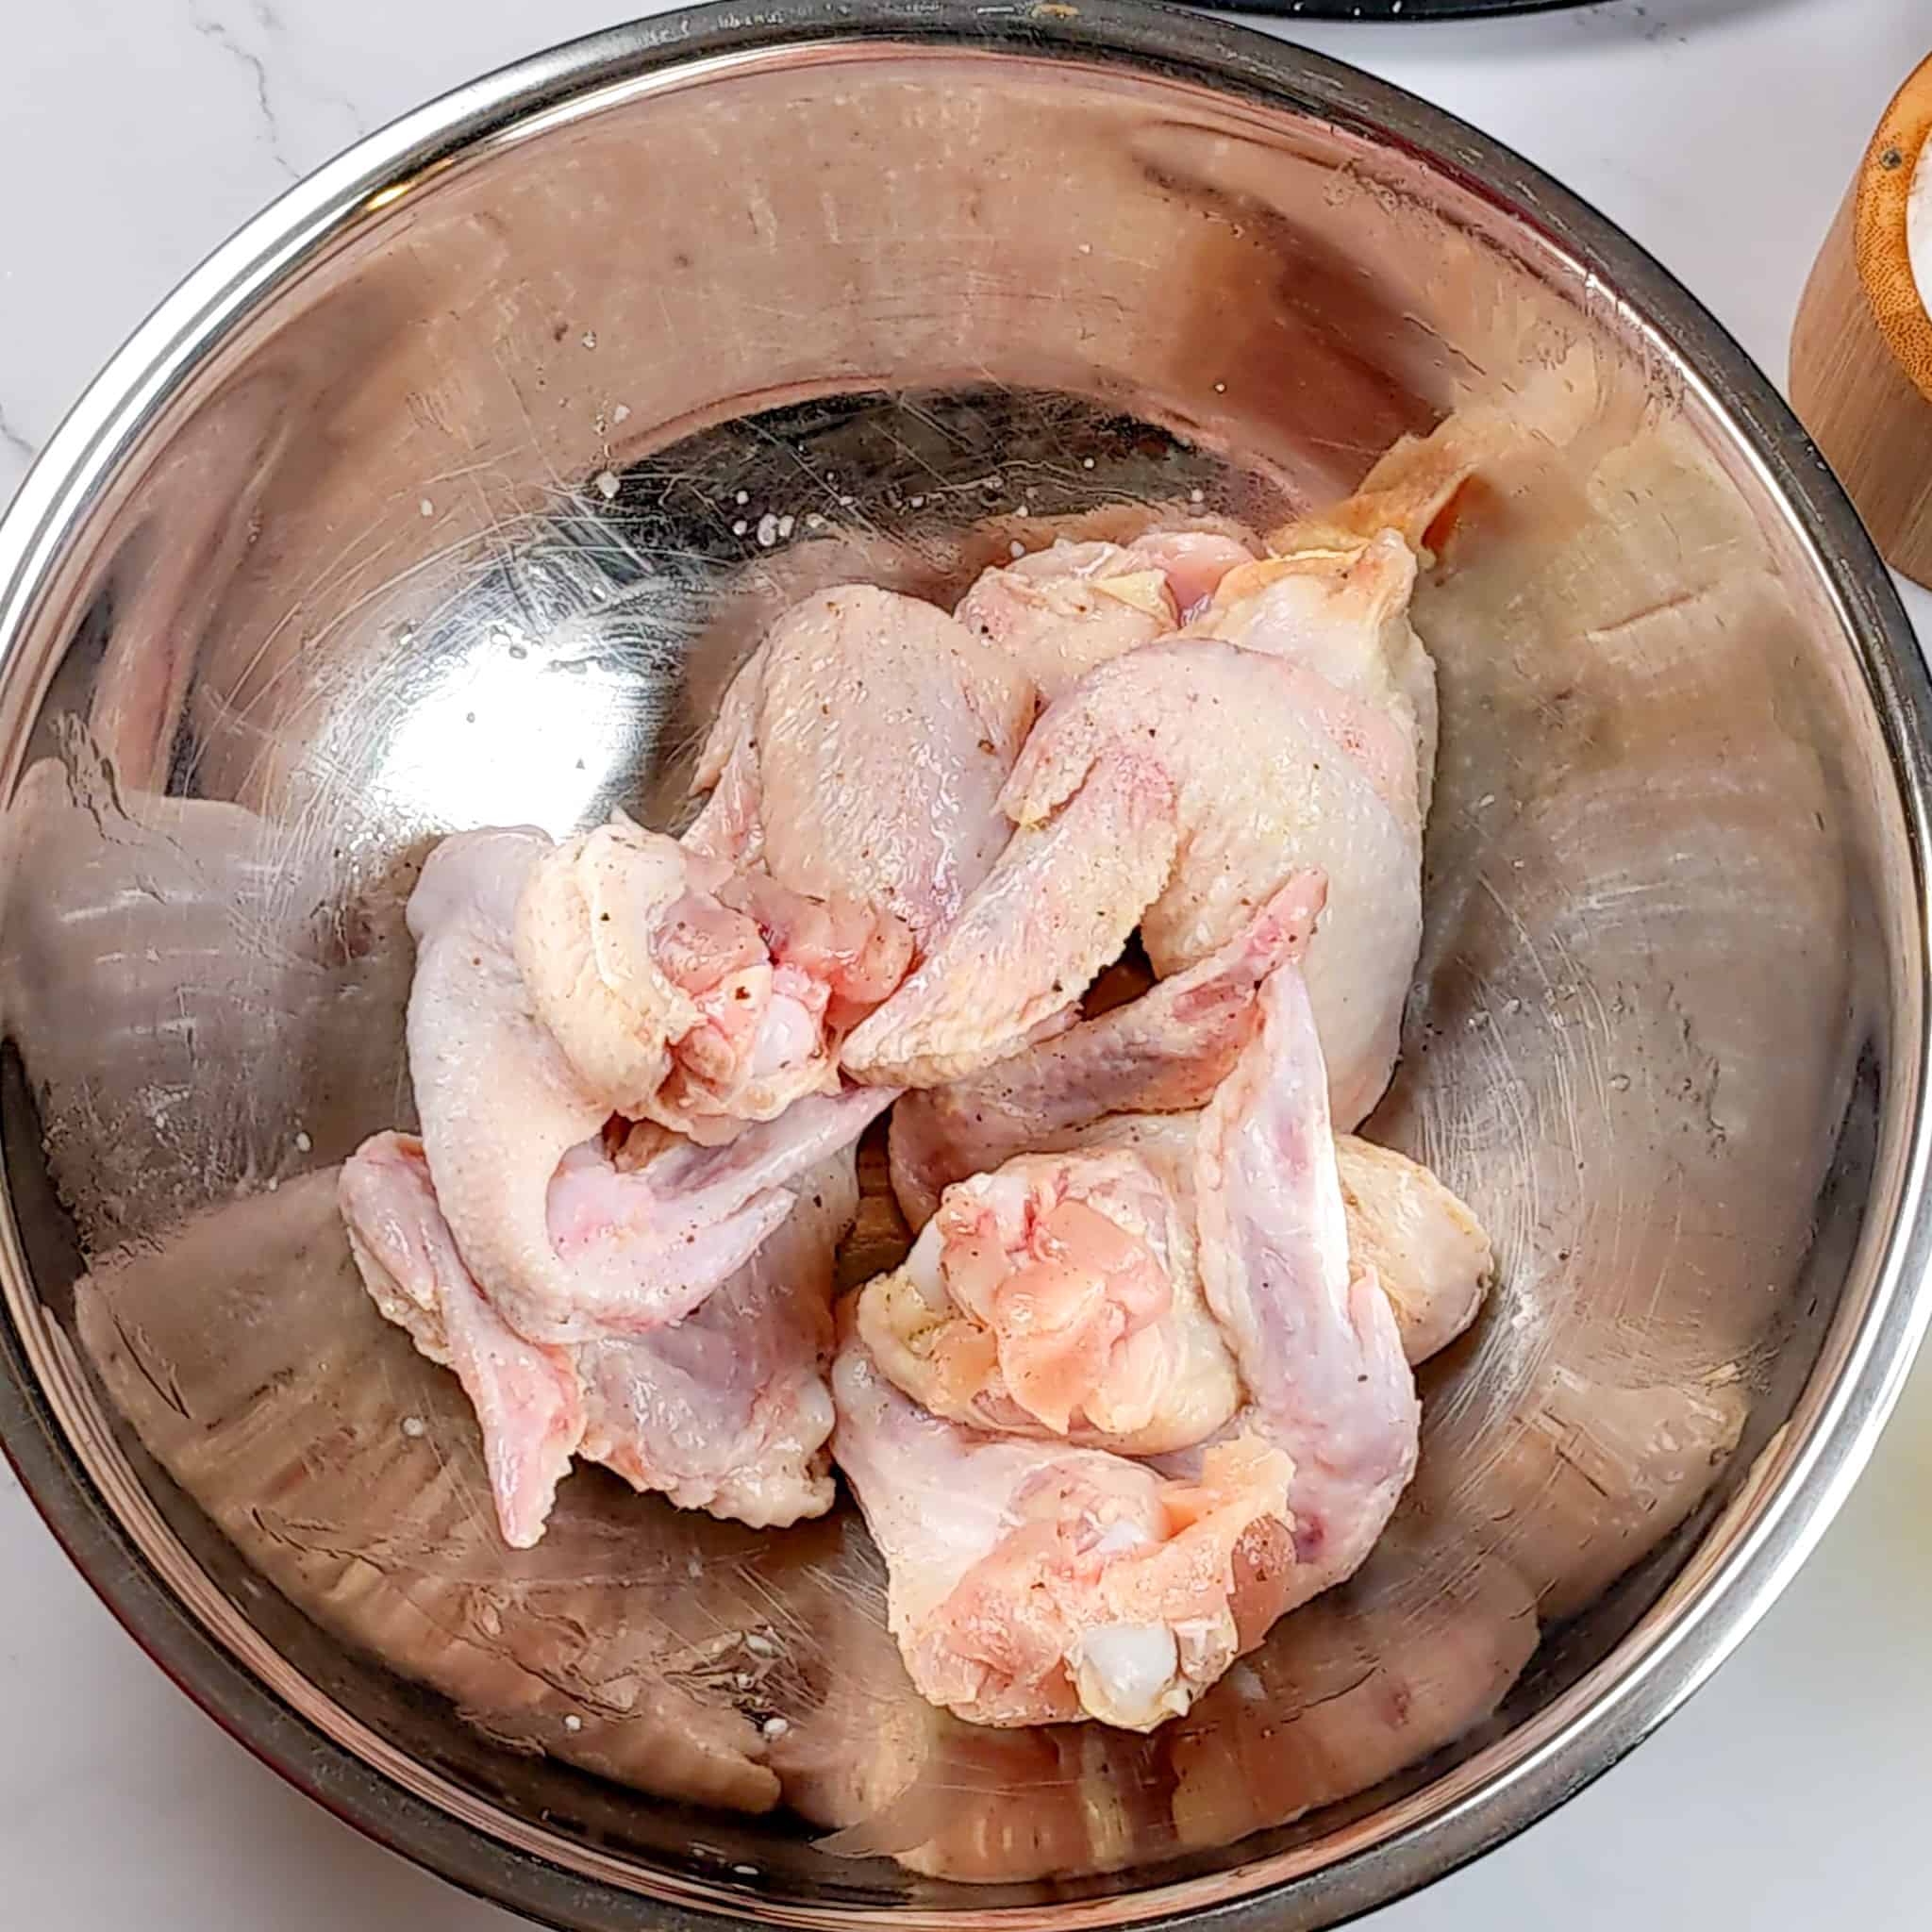 raw salt, pepper and oil seasoned whole chicken wings in a large stainless steel mixing bowl